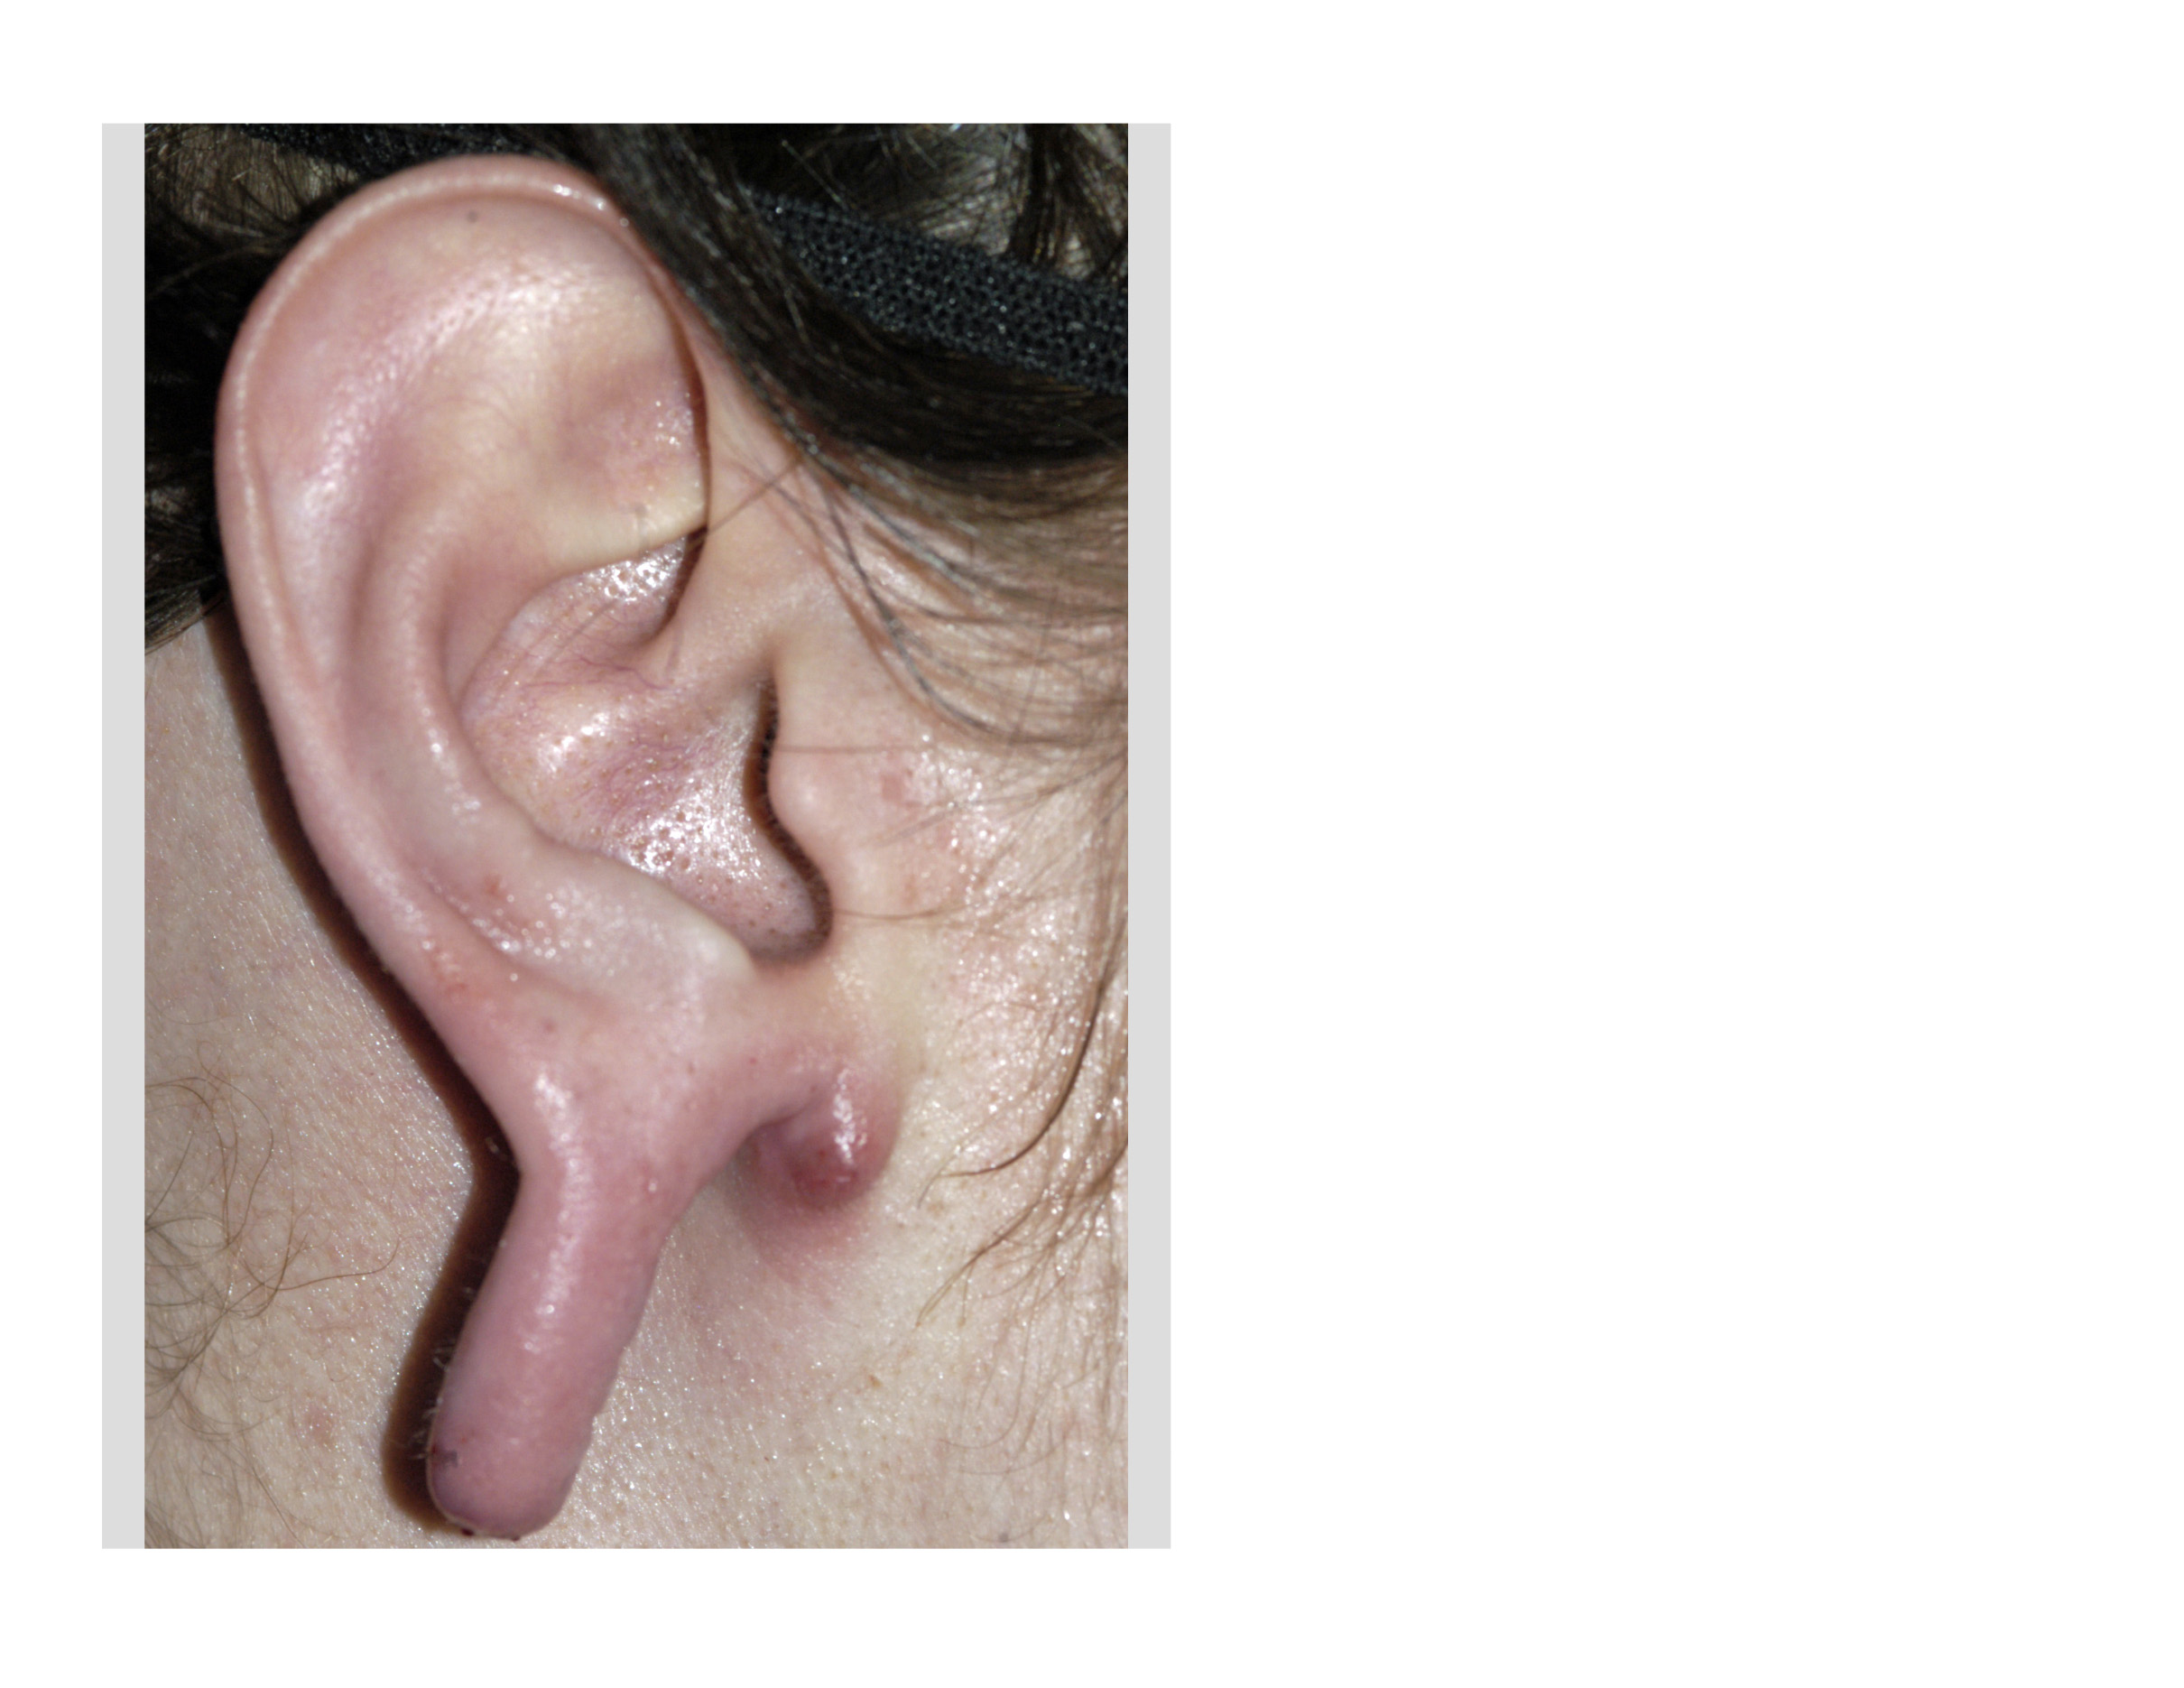 Torn and stretched ear lobe repairs - Kingsley Medical